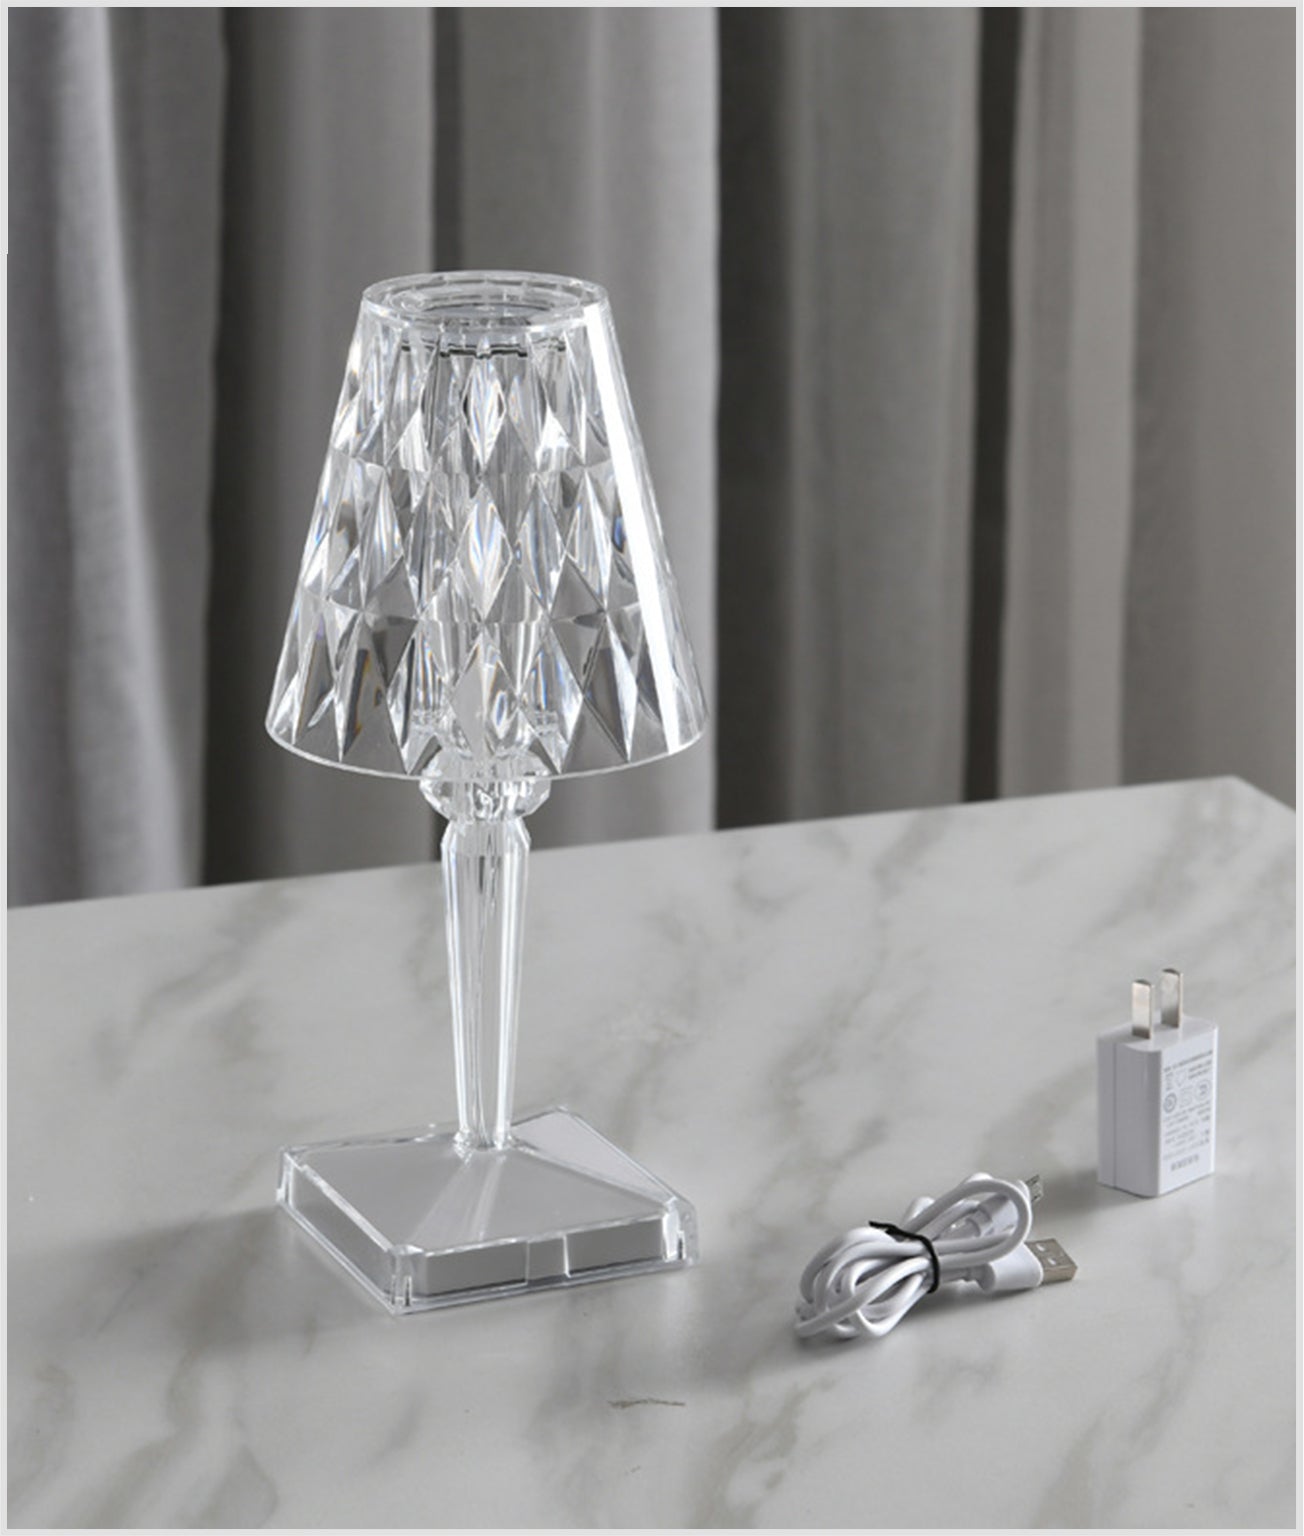 Buy 1 Get 1 Free Rechargeable Acrylic Diamond Nightstand Lamp Cordless , 3-Way Dimmable Color, Touch Control & Elegant Lamp Shade - BUY 1 GET 1 ONE